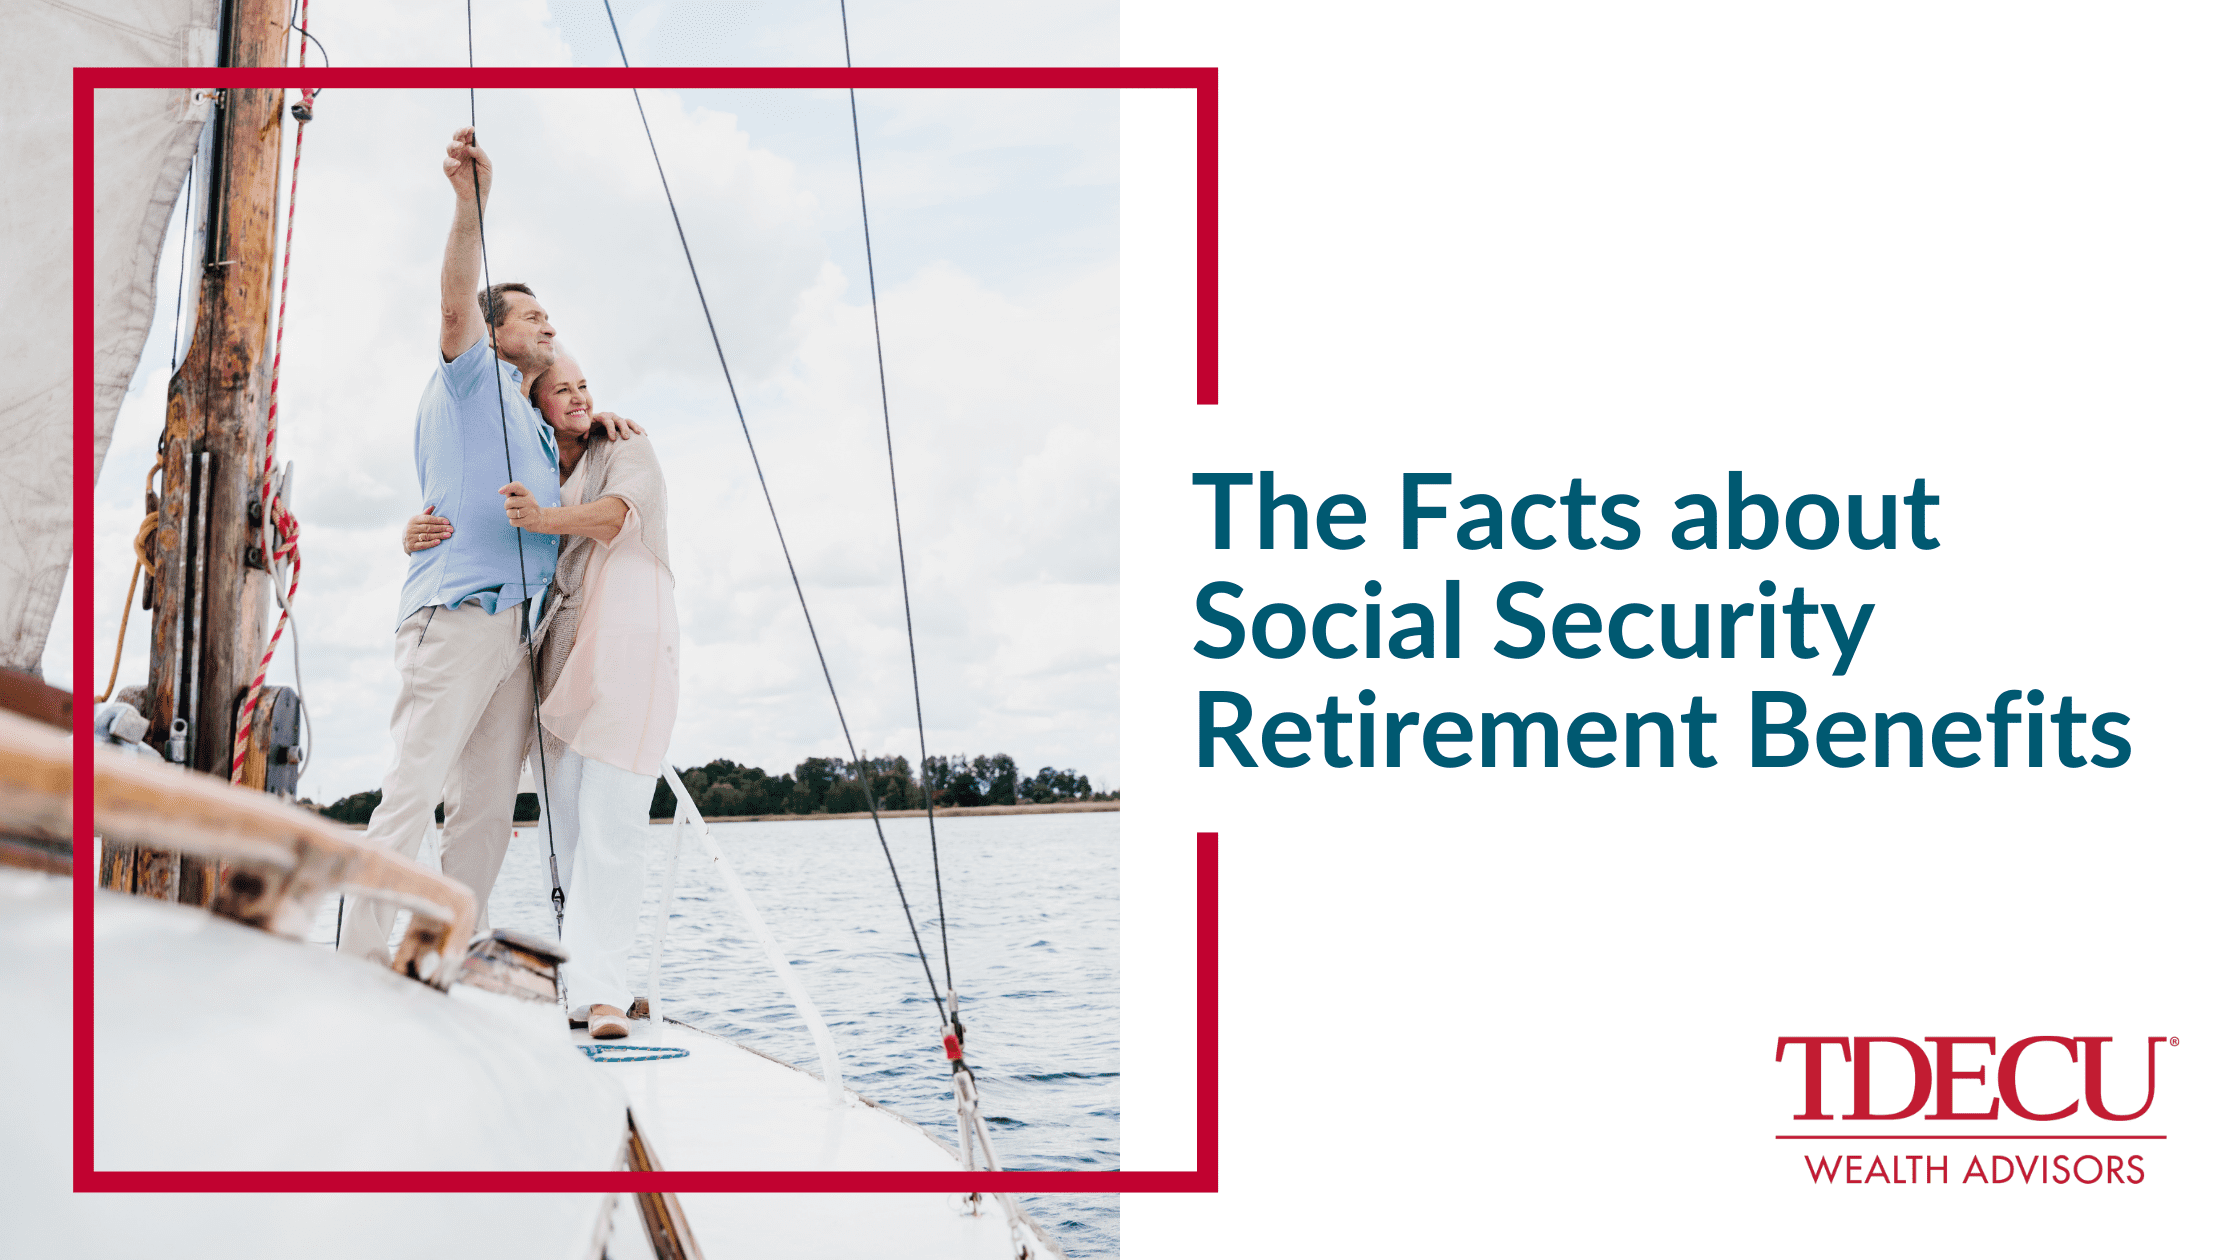 The Facts about Social Security Retirement Benefits